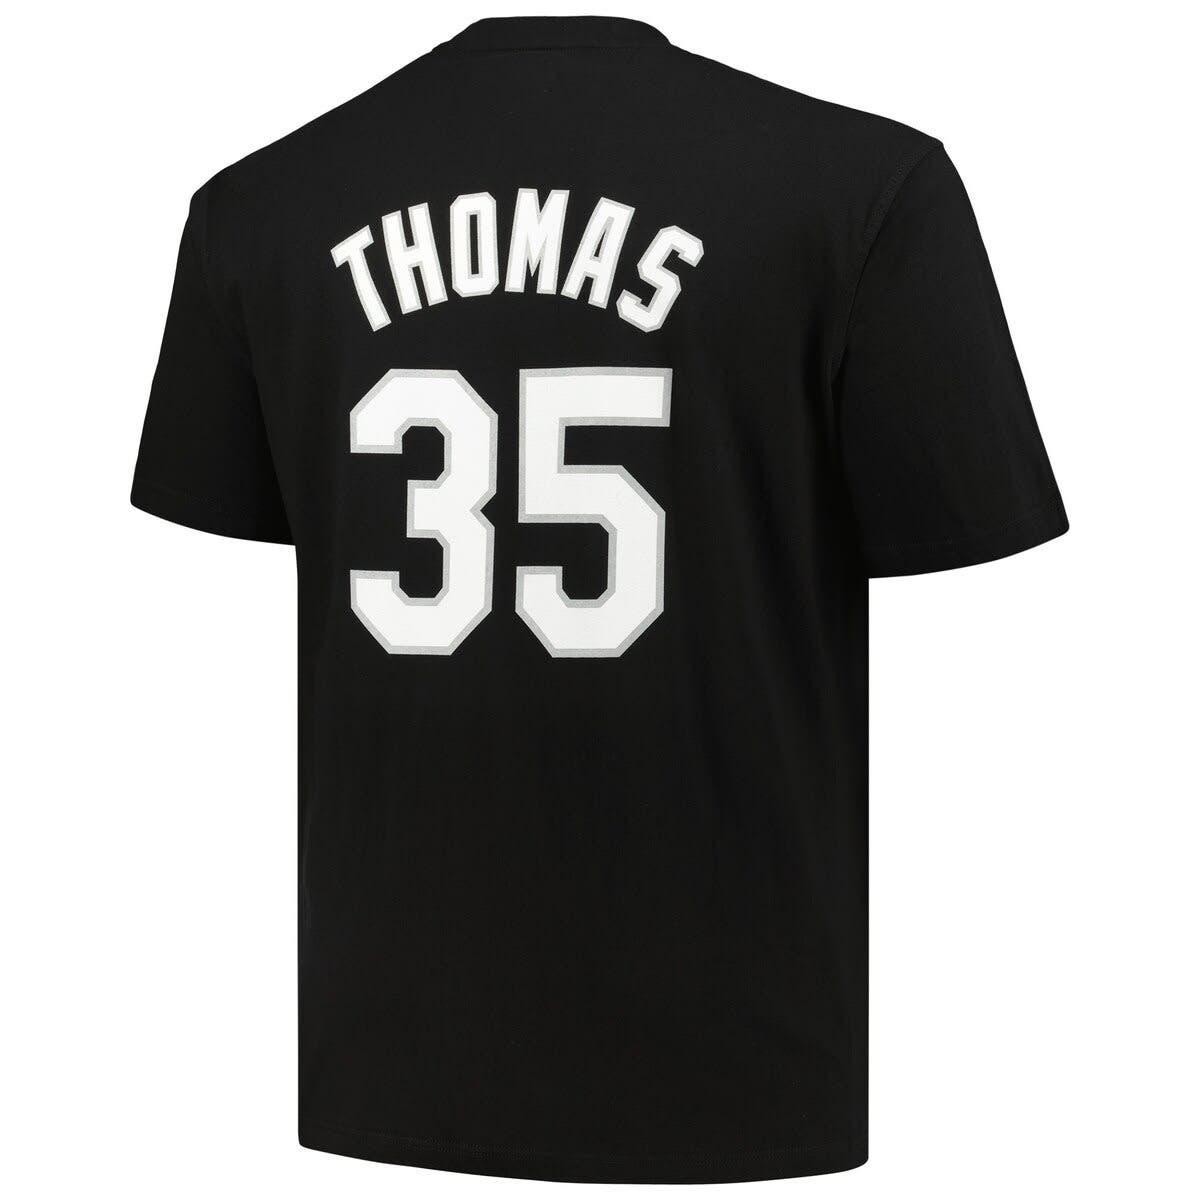 Southside Sox T-Shirt from Homage. | Charcoal | Vintage Apparel from Homage.